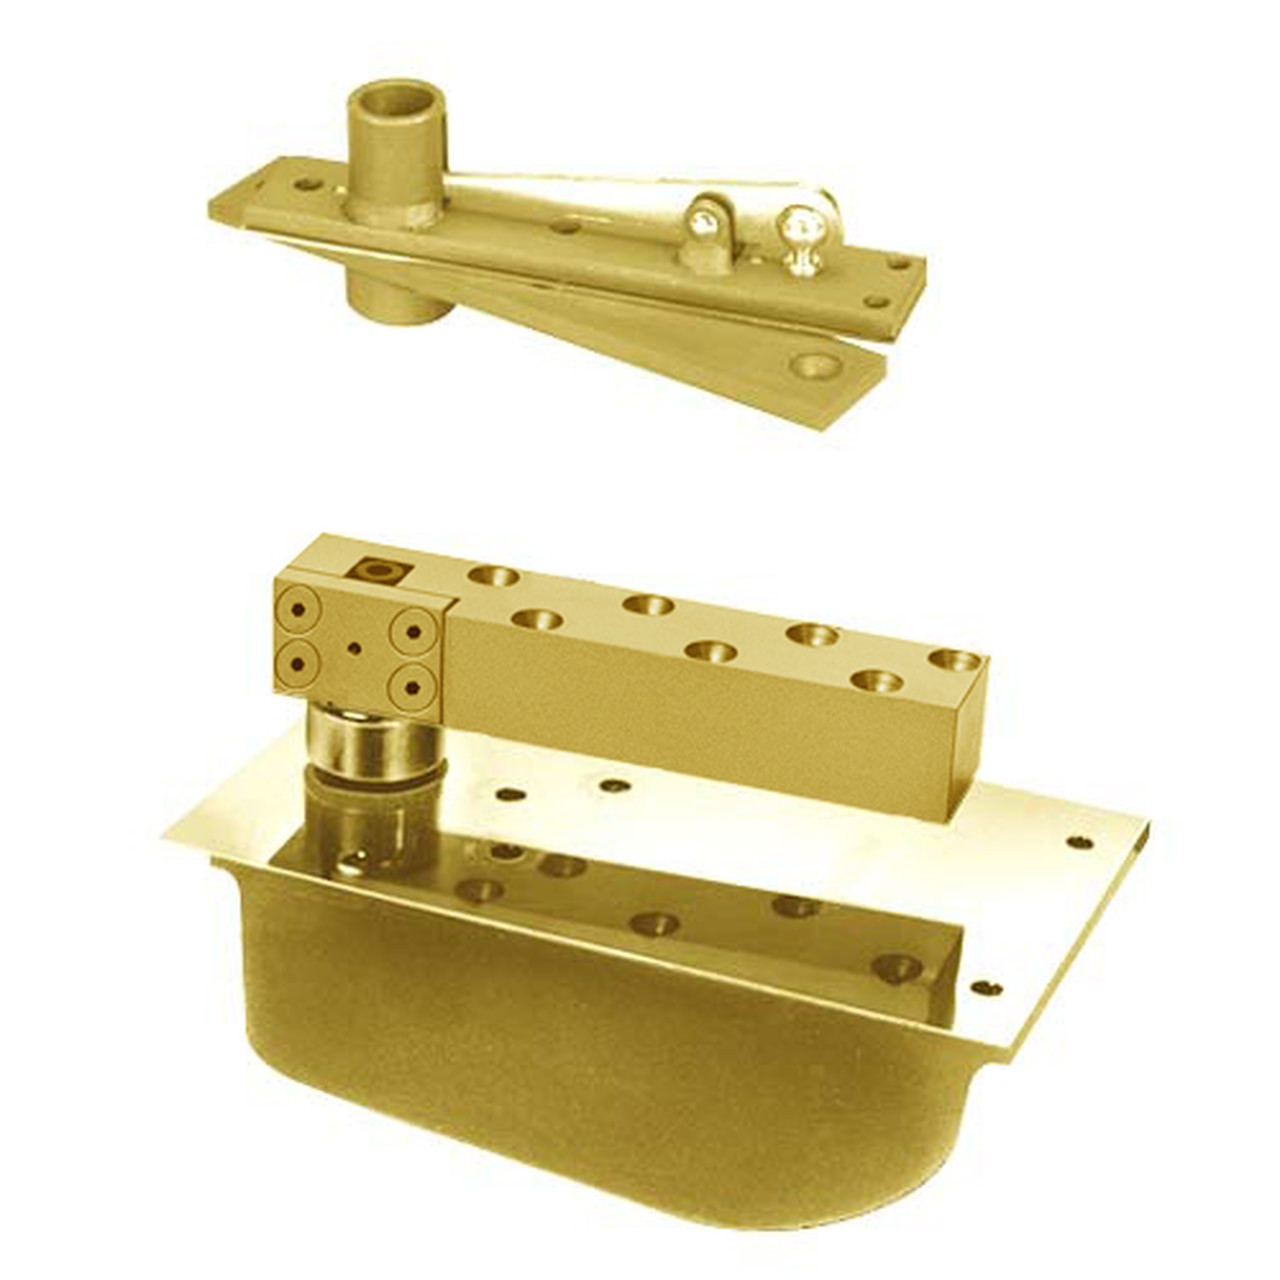 H28-90N-587-LFP-LCC-RH-605 Rixson 28 Series Extra Heavy Duty Single Acting Center Hung Concealed Floor Closer in Bright Brass Finish